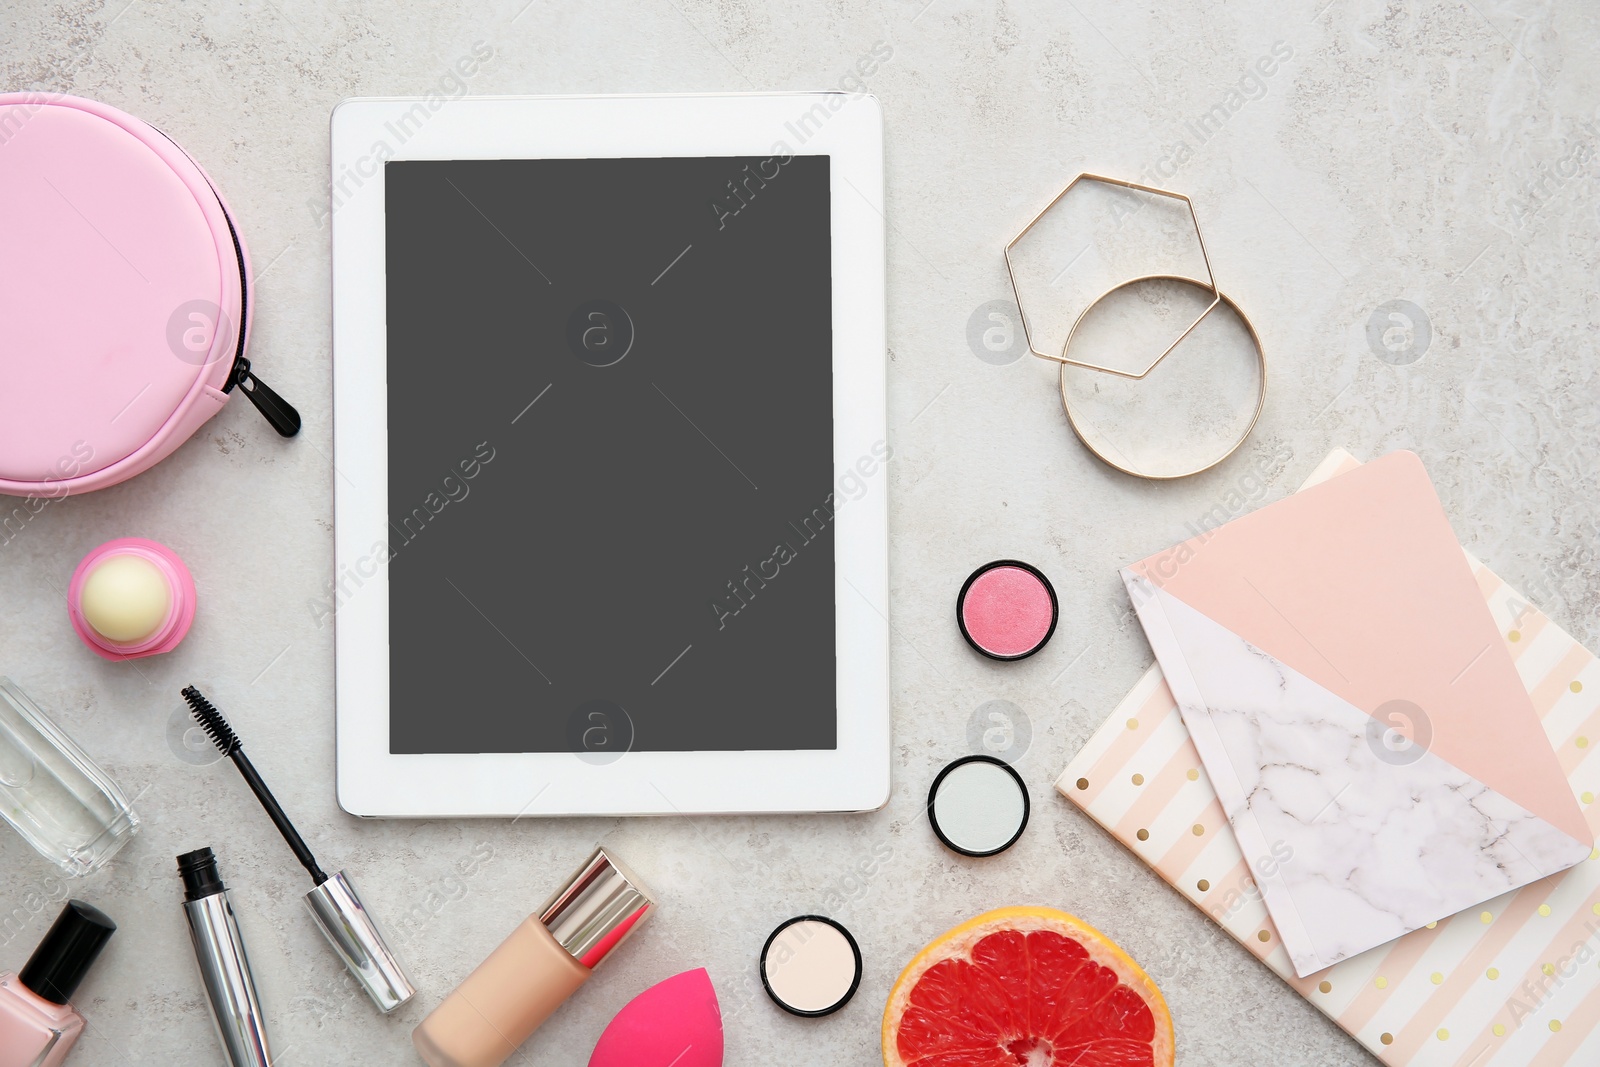 Photo of Flat lay composition with tablet and makeup products on grey background